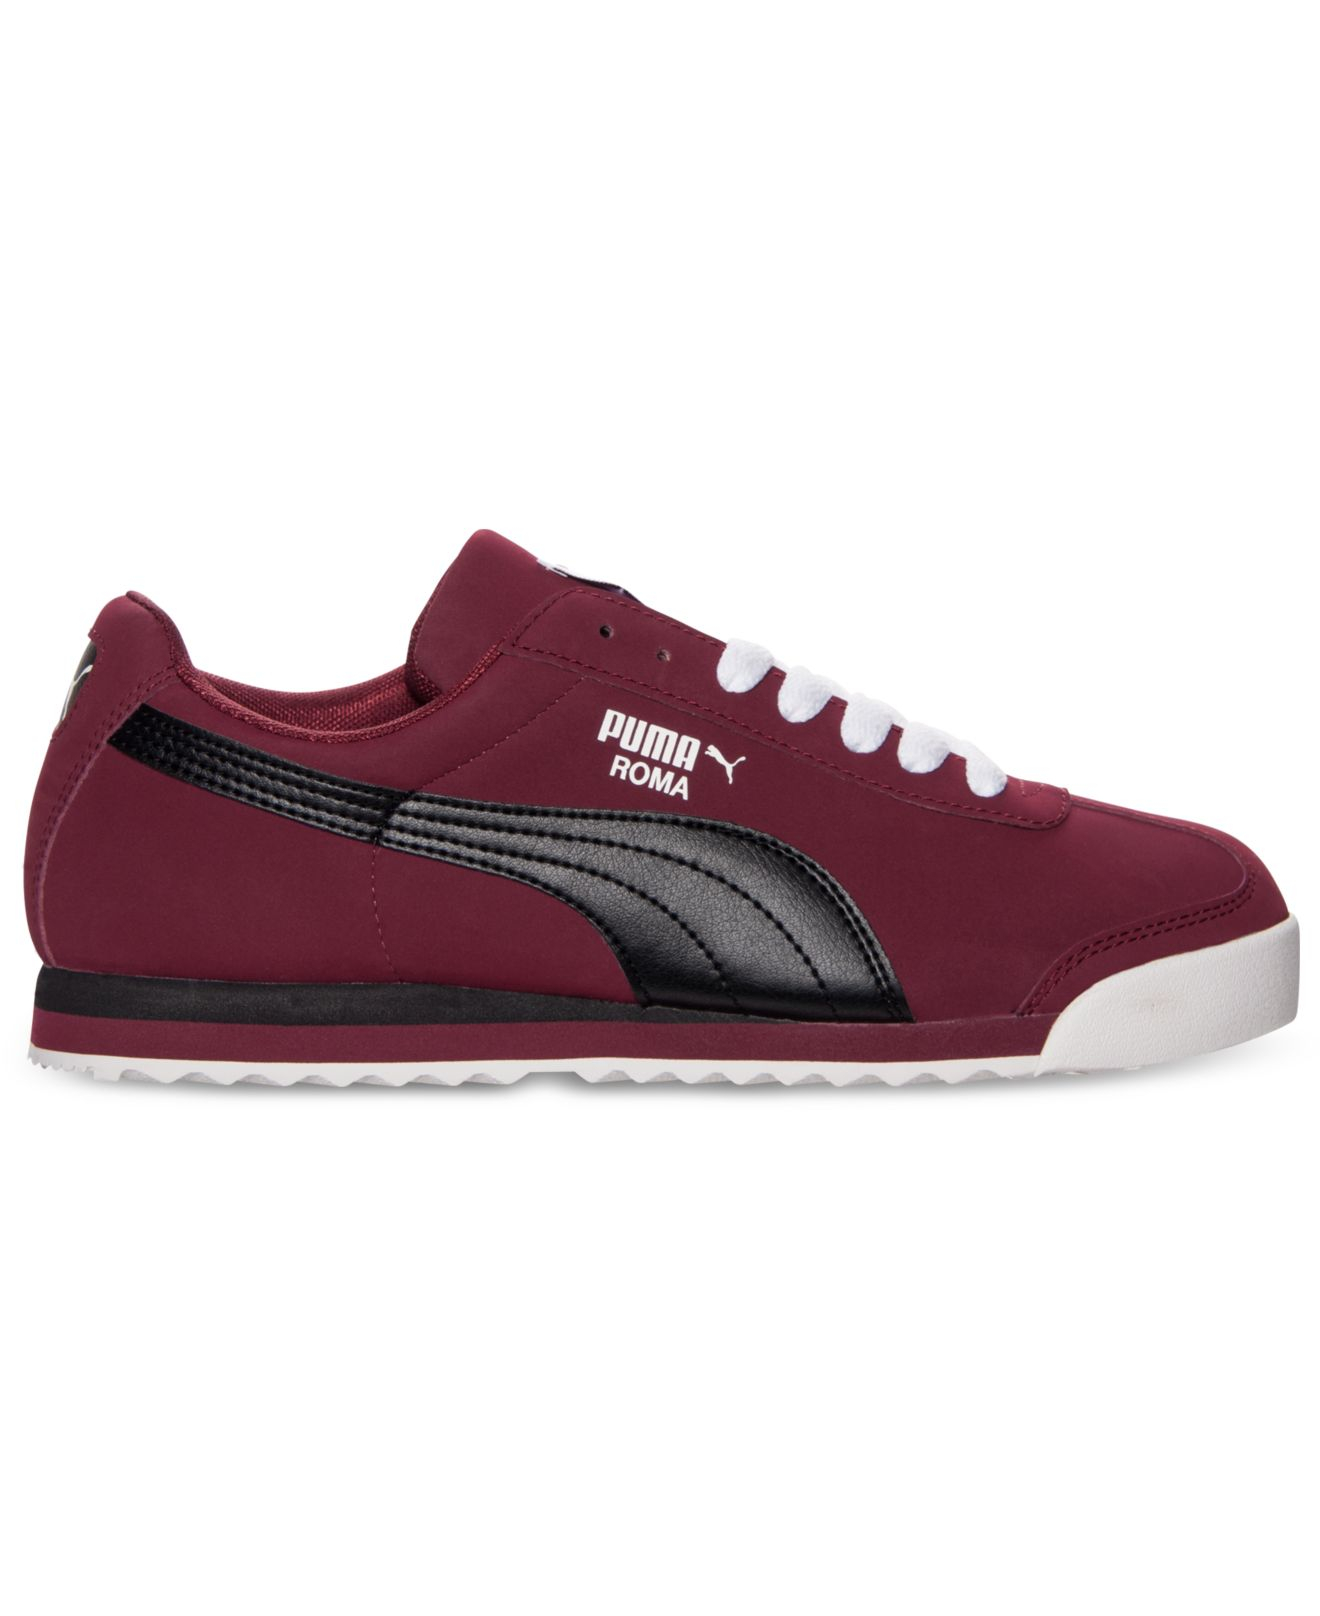 Lyst - Puma Men'S Roma Sl Nubuck 2 Casual Sneakers From Finish Line in ...